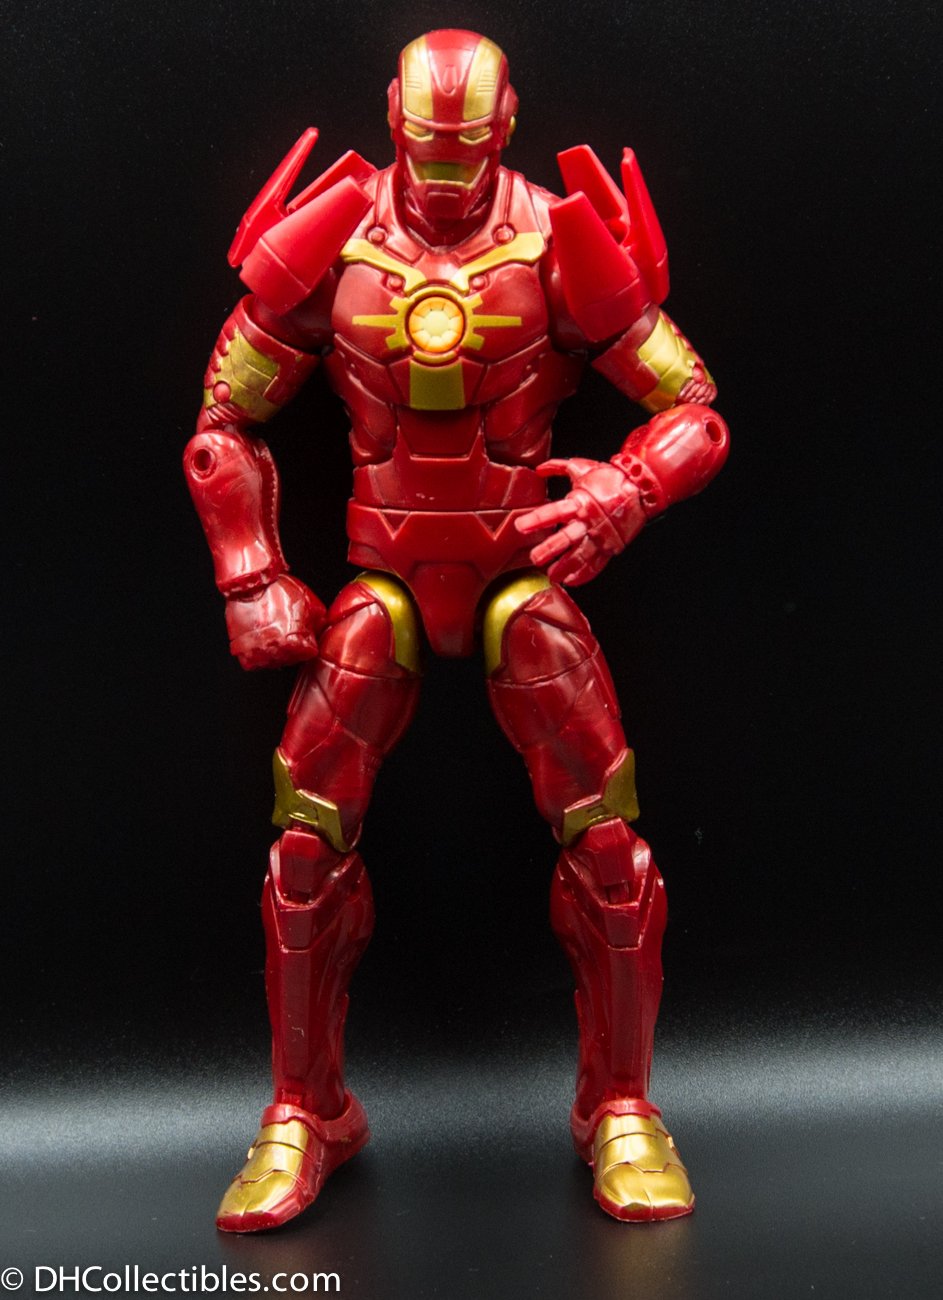 2012 Marvel Legends Iron Man Guardians of the Galaxy Action Figure - Loose